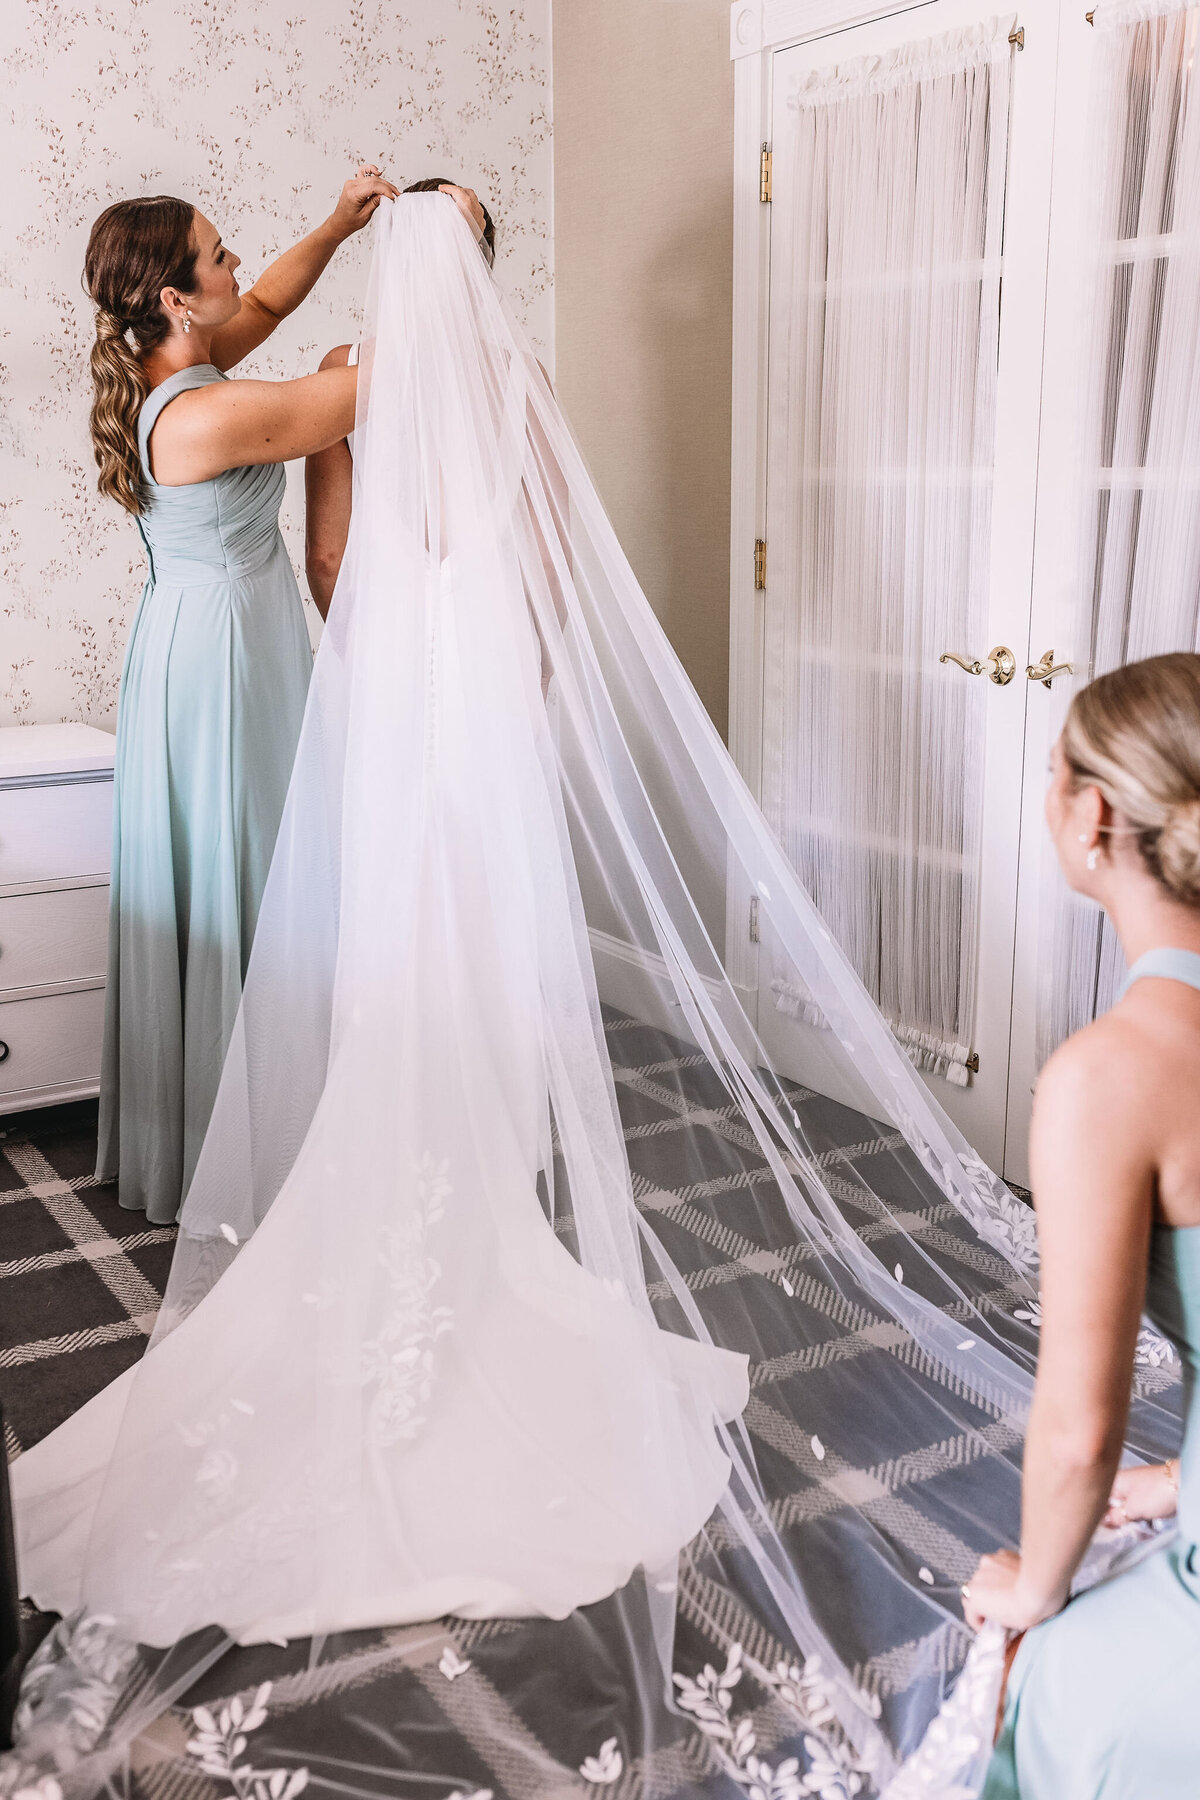 Maid of honor putting the cathedral length vail on bride in getting ready room at Wentworth Inn in Jackson NH by Lisa Smith Photography